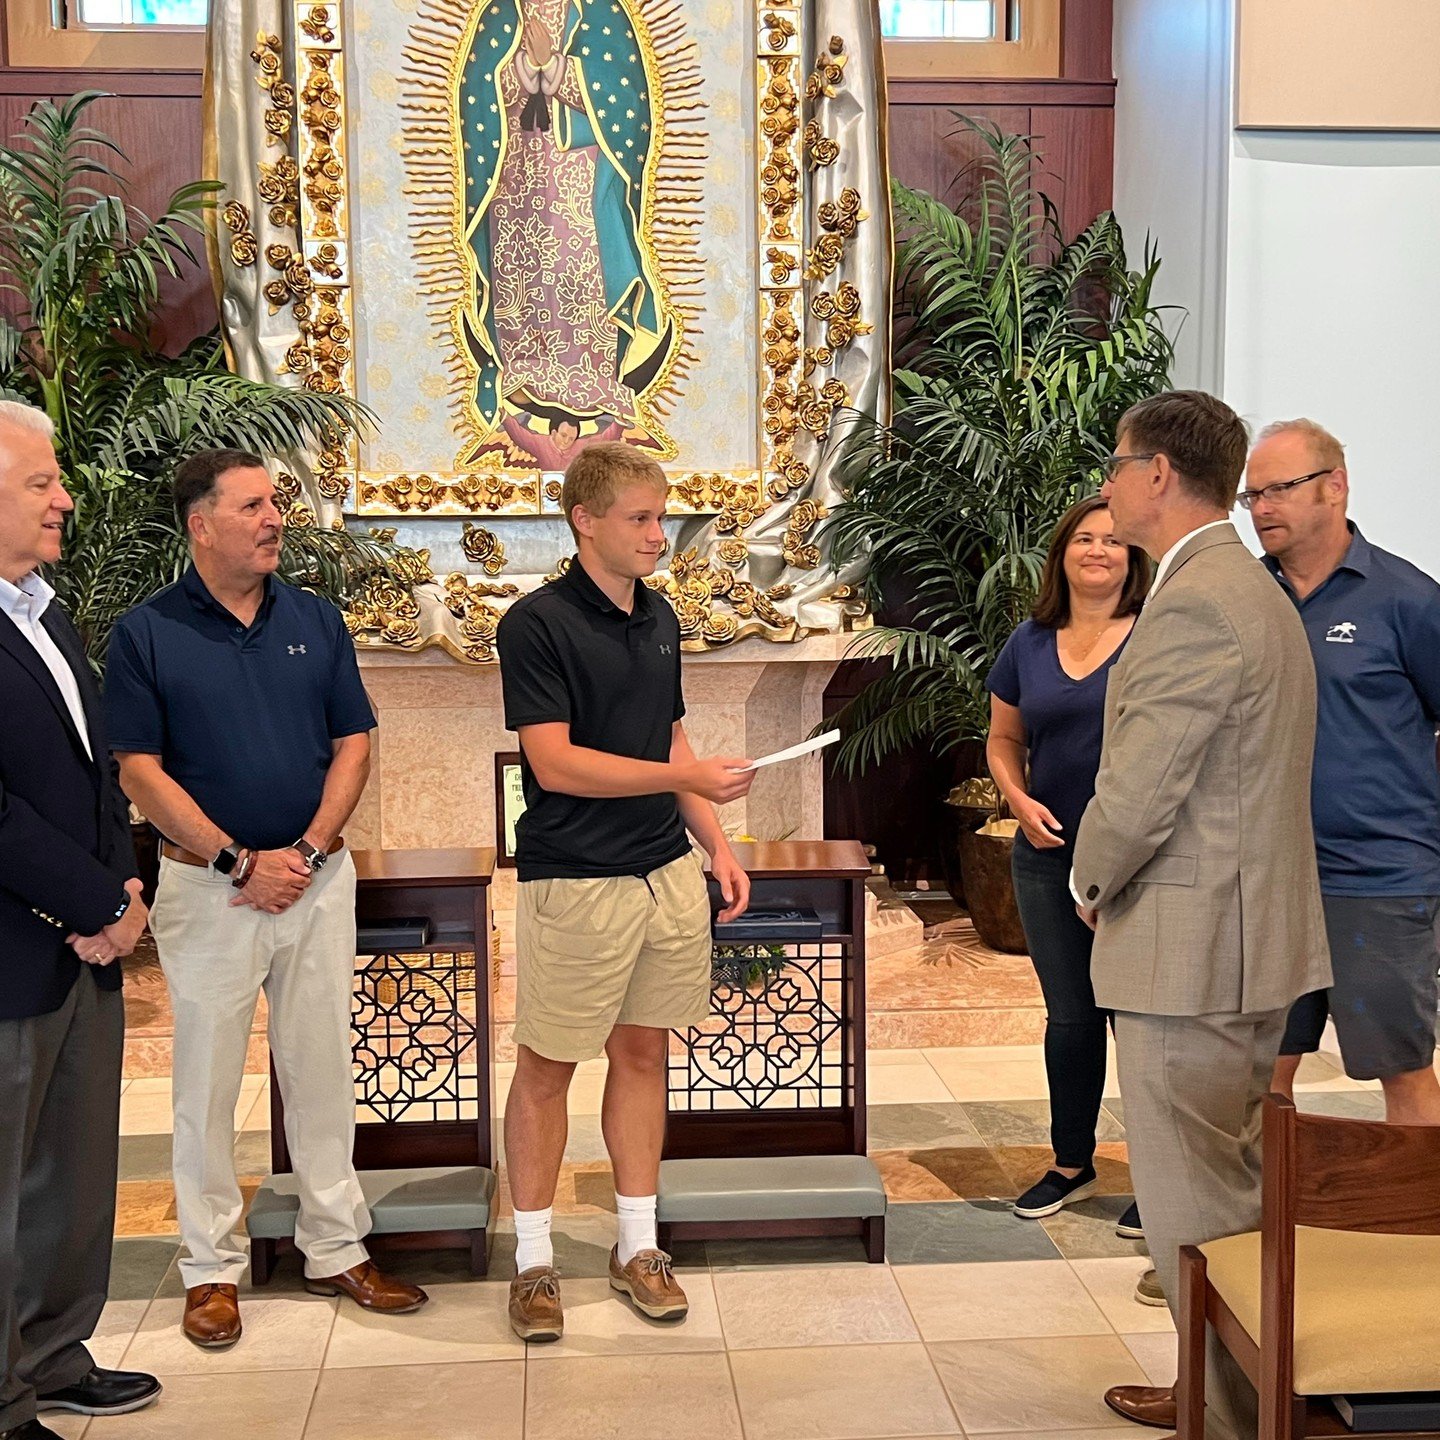 One of the Knights's guiding principles is Unity: You can count on the support and encouragement of your brother Knights as you work to make life better in your parish and community. The Squires represent the &quot;farm team&quot; for the Knights and